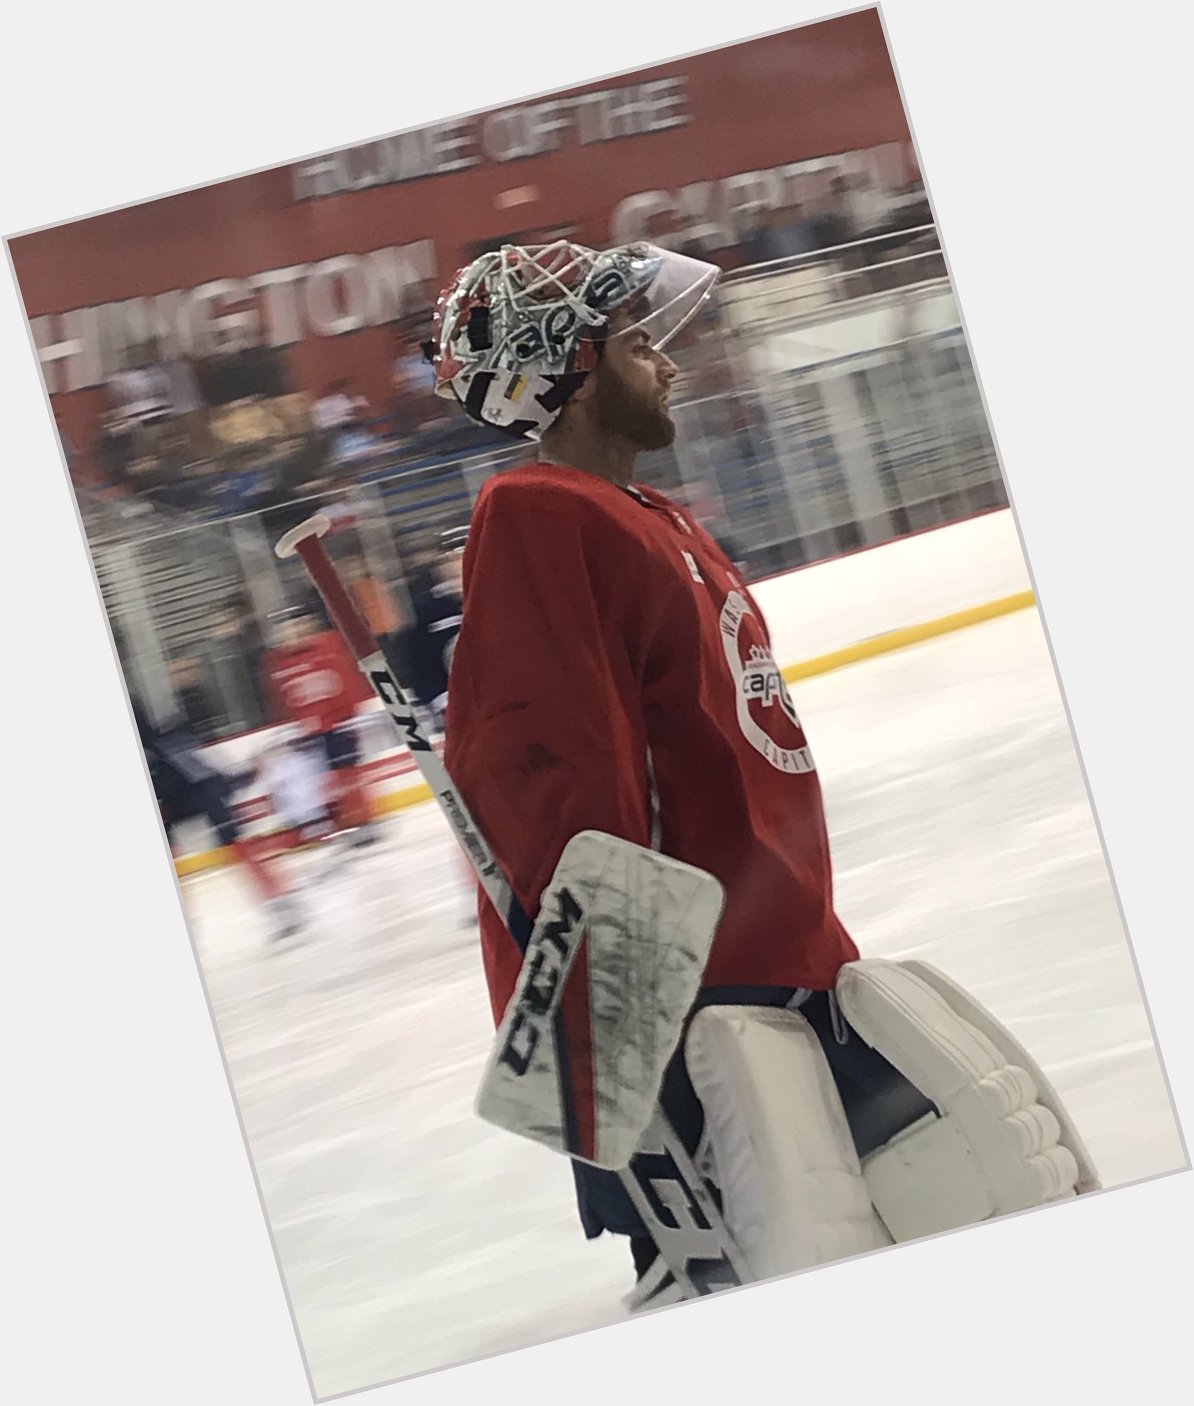 Happy Birthday to my favorite Caps player! Braden Holtby!     